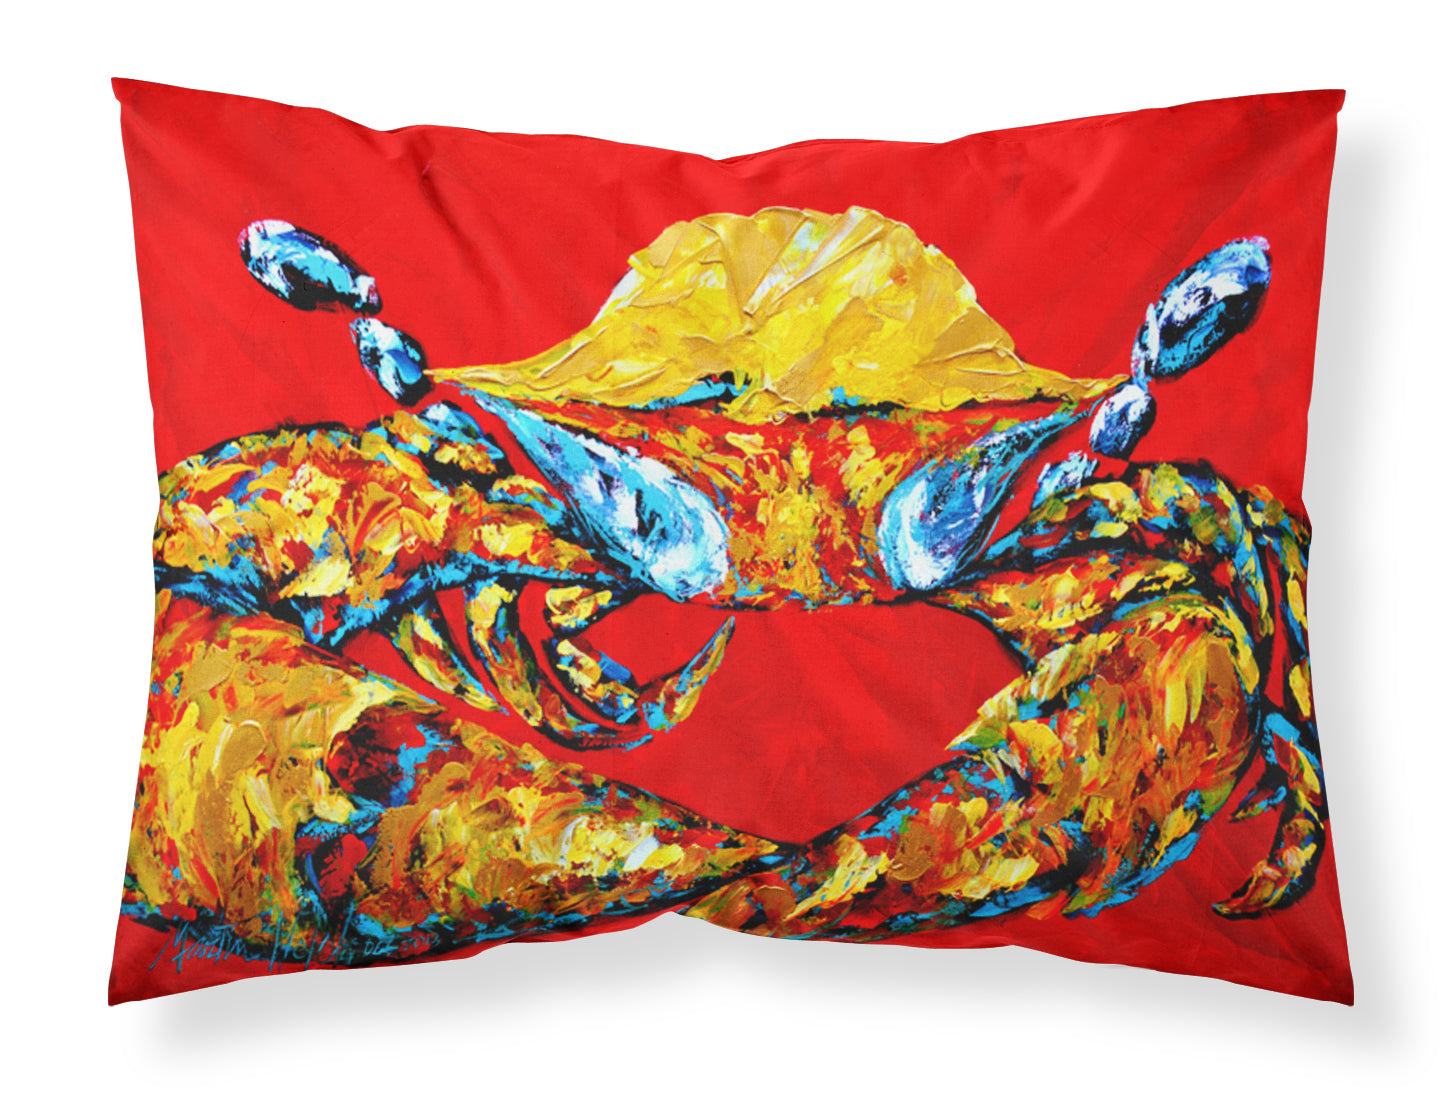 Buy this Crab Fat and Sassy Fabric Standard Pillowcase